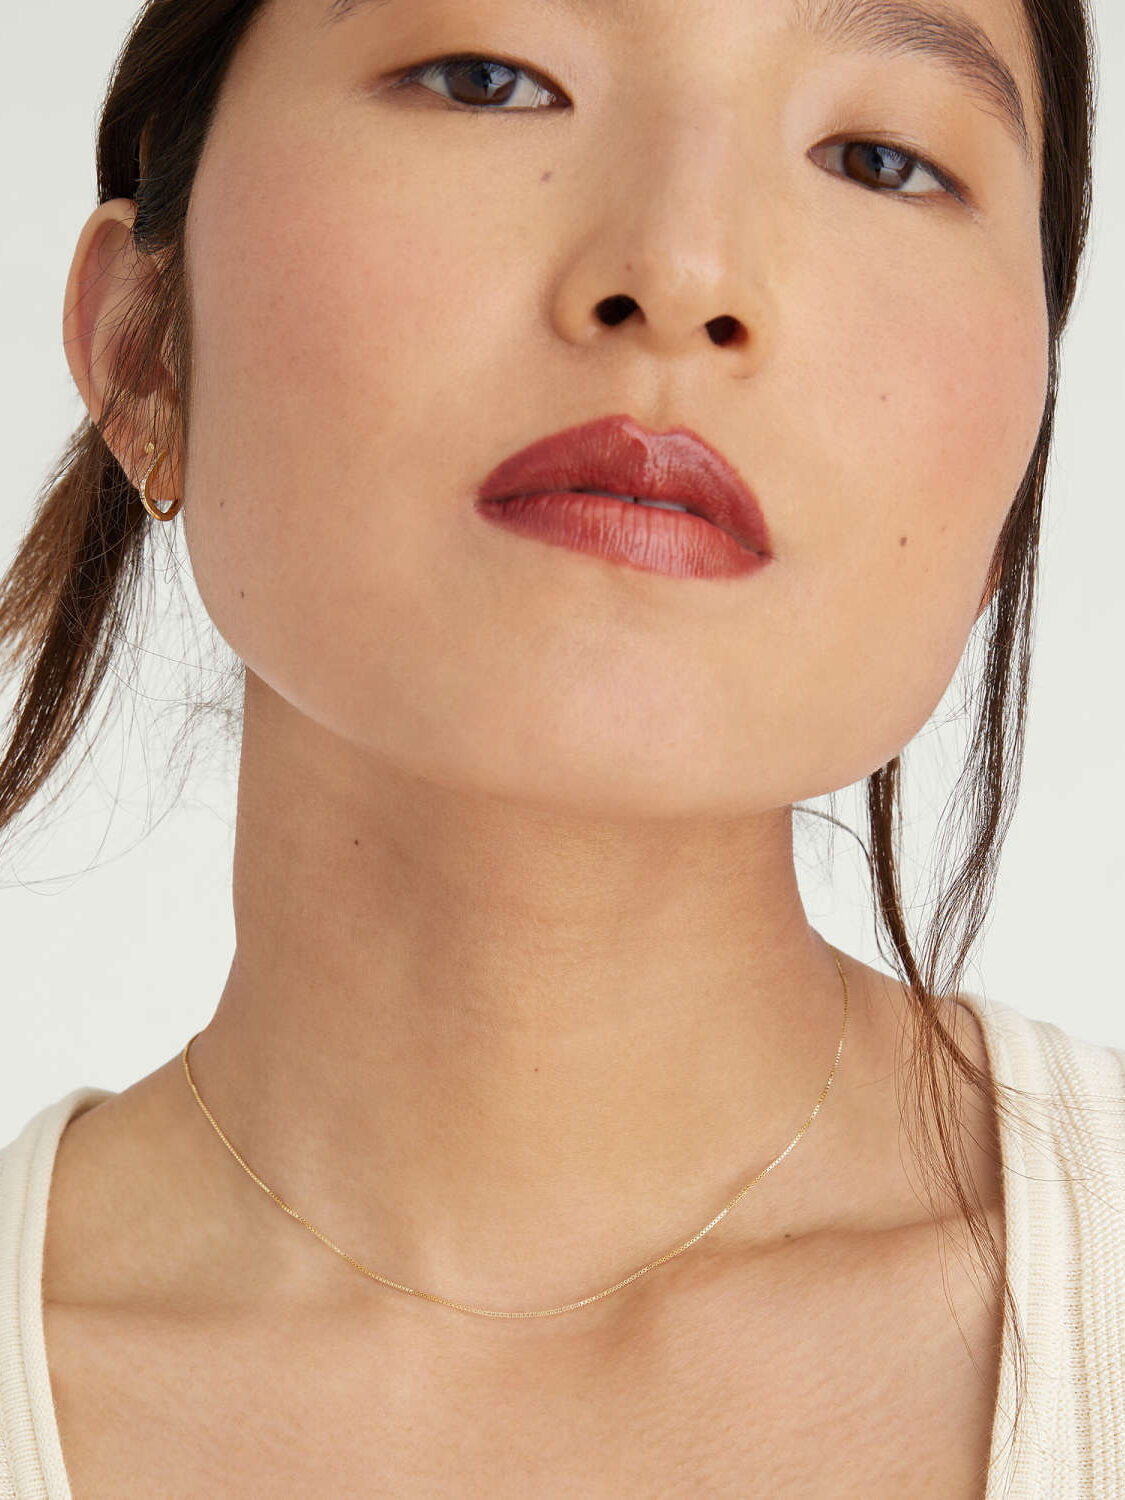 Close-up portrait of a woman with minimal makeup, wearing a delicate gold necklace and a beige top, focusing on her face from the nose up.